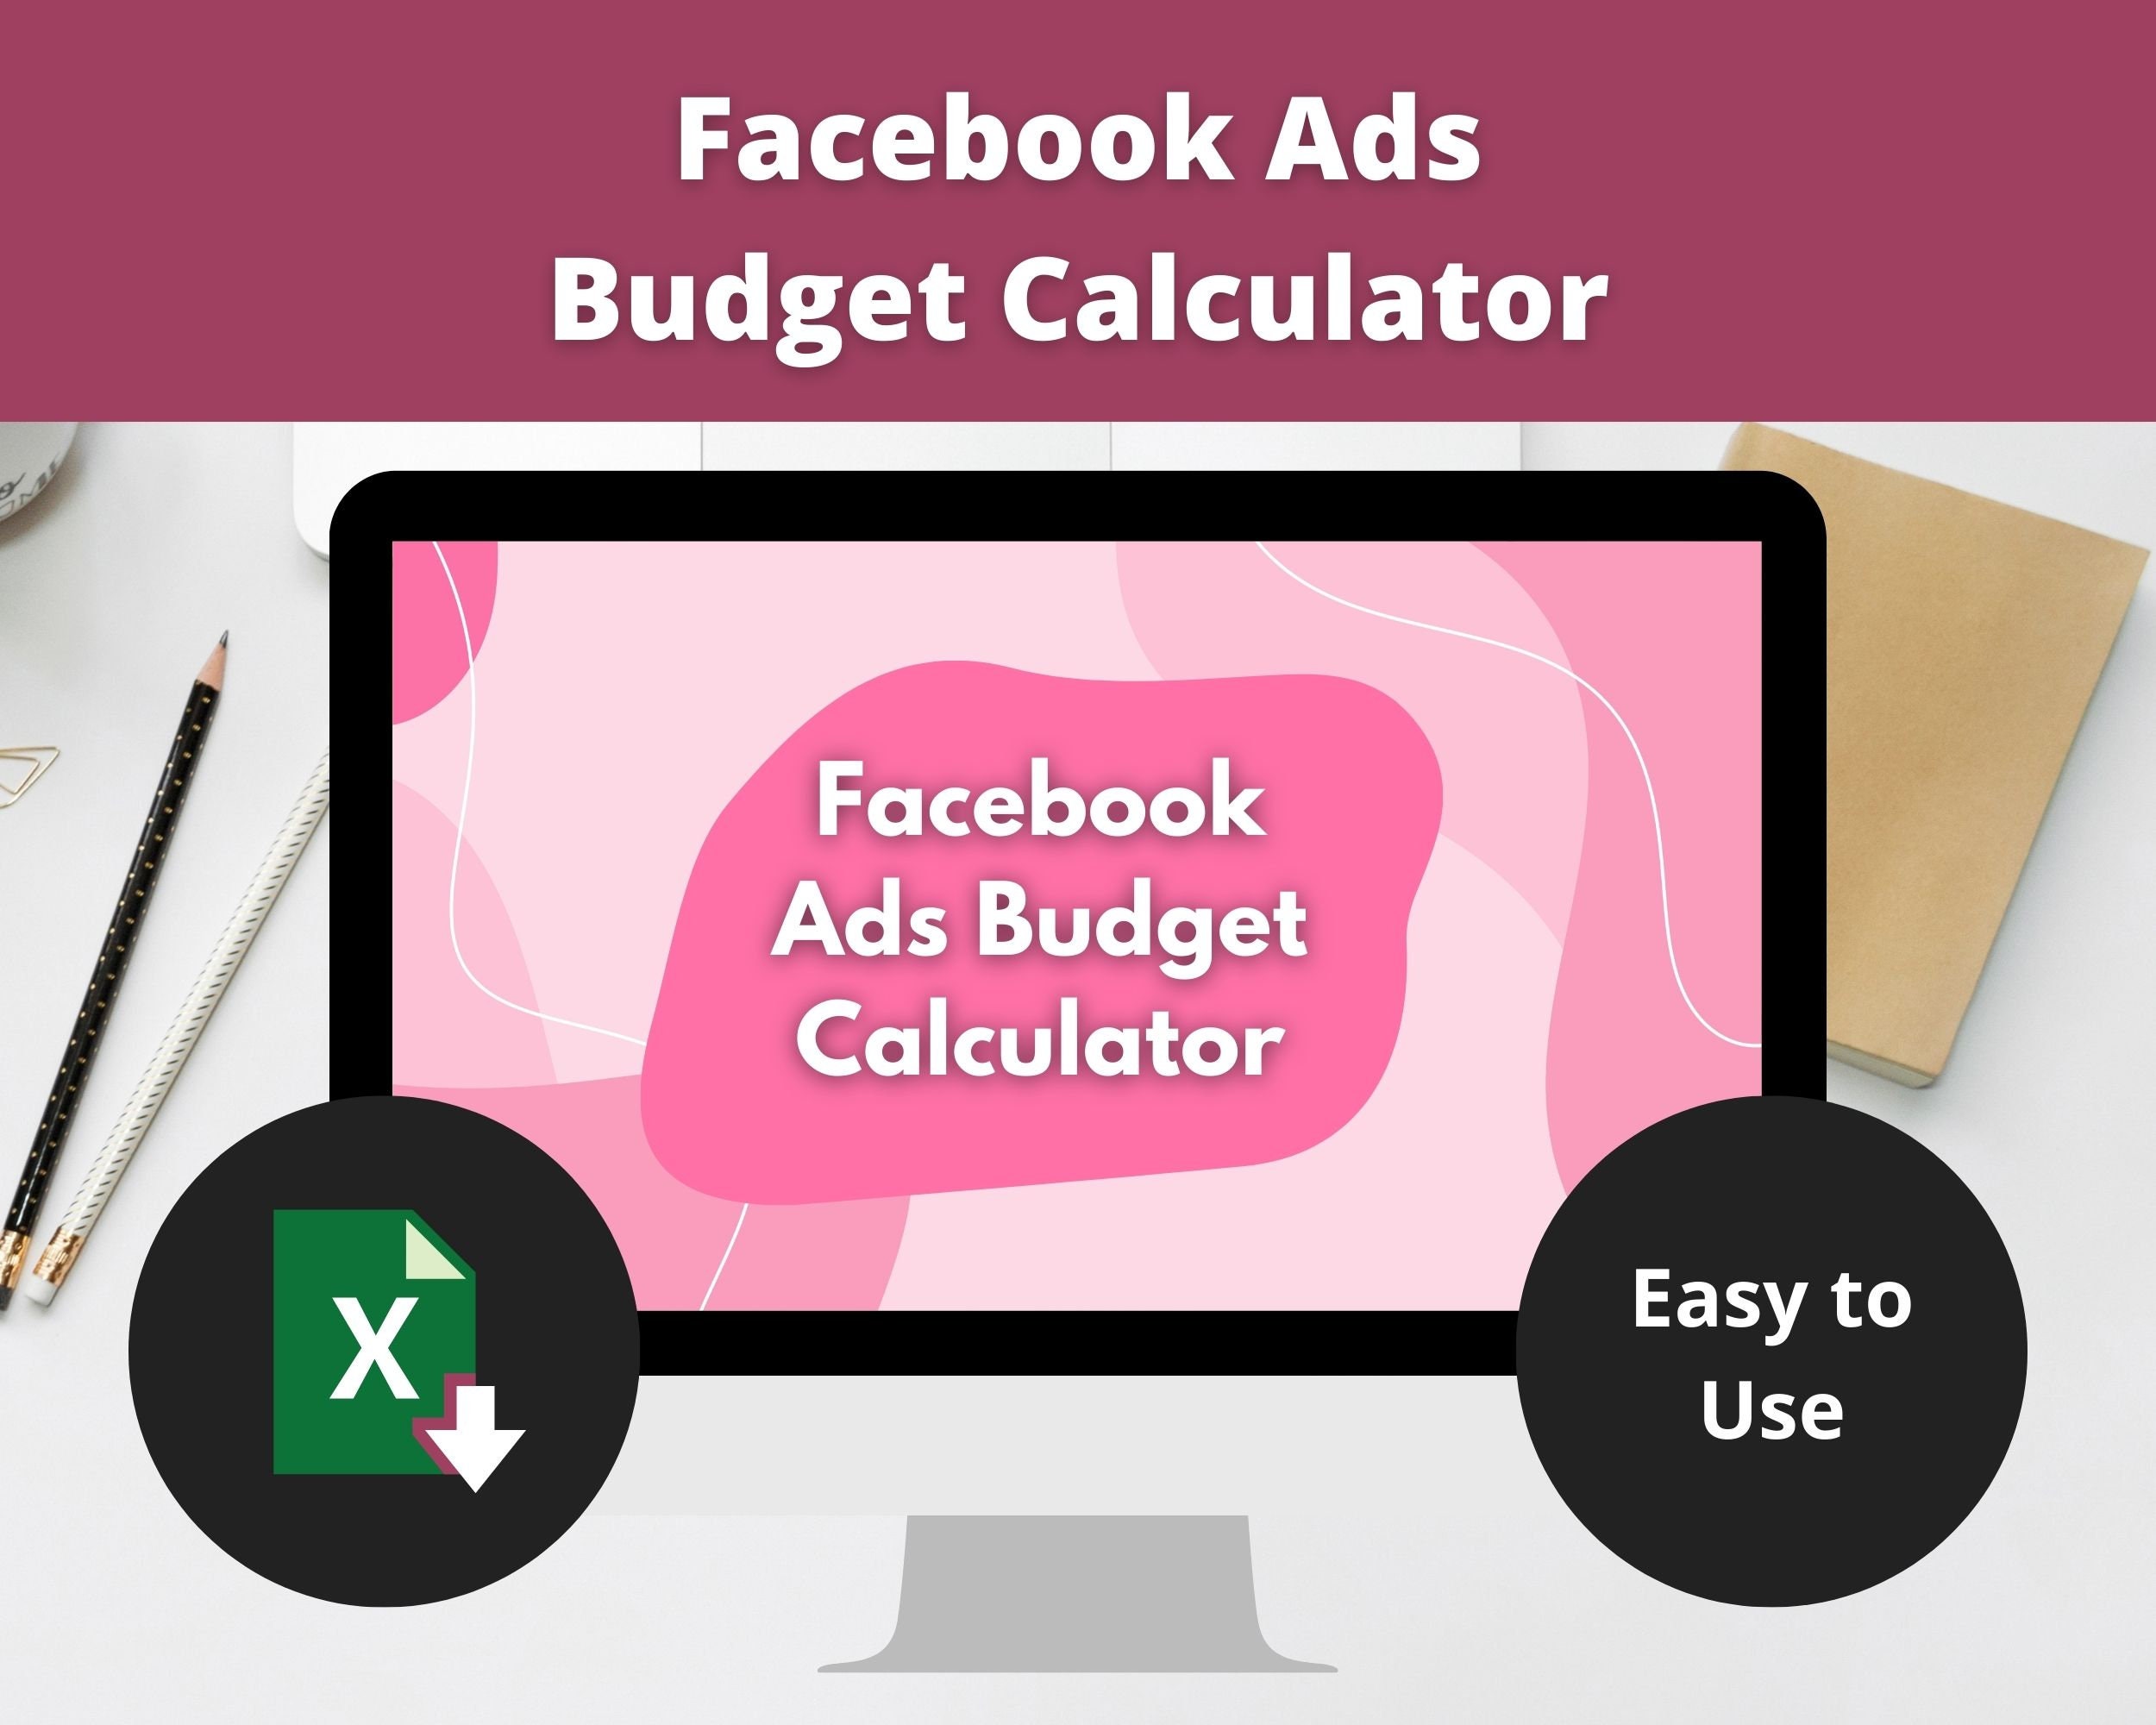 Facebook Ads Budget Calculator Online Course Creation - Etsy